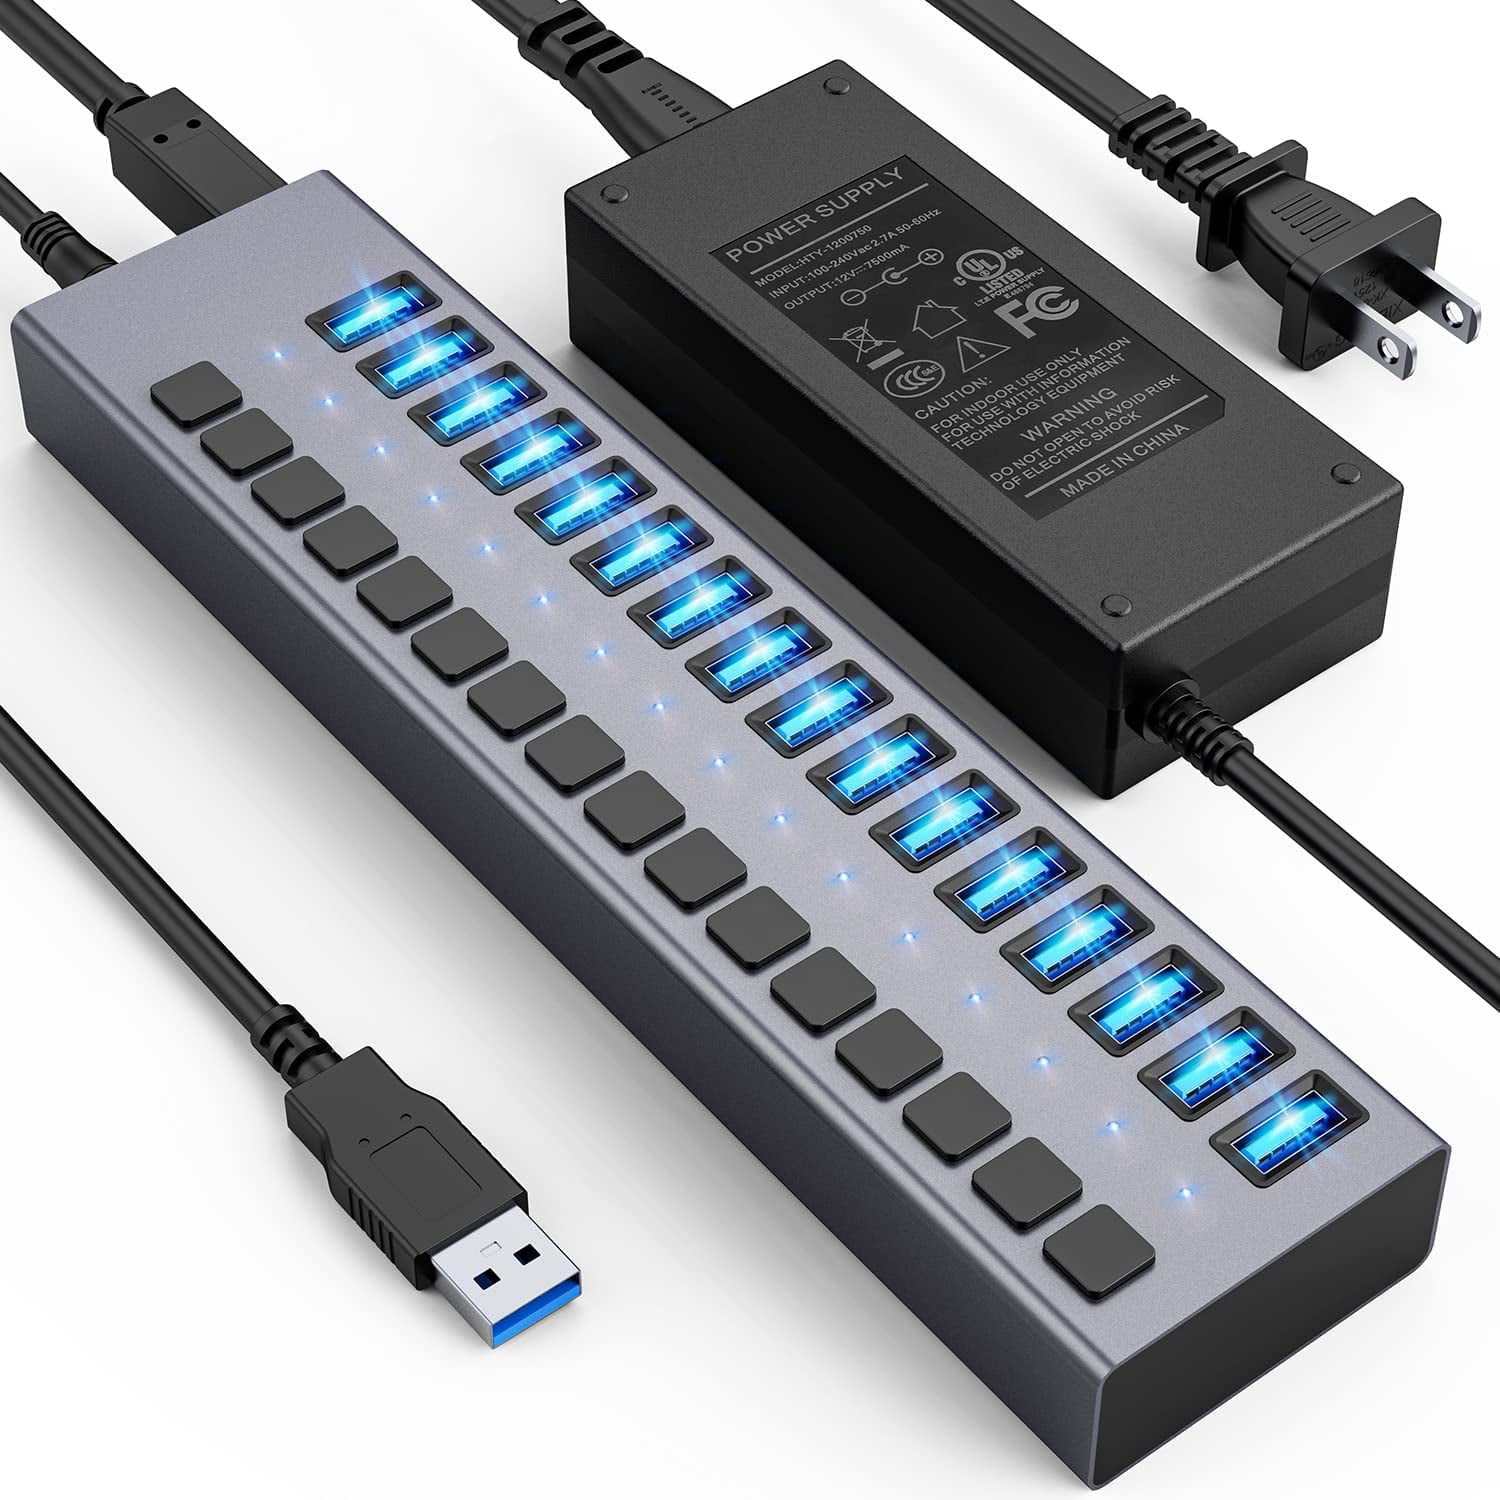 Powered USB Hub - 16 90W USB 3.0 Data Hub, Individual On/Off Switches, 12V/7.5A Power Adapter, 5Gbps High Speed, USB 3.0 for Laptop, Computer, Mobile HDD, Flash Drive Walmart.com